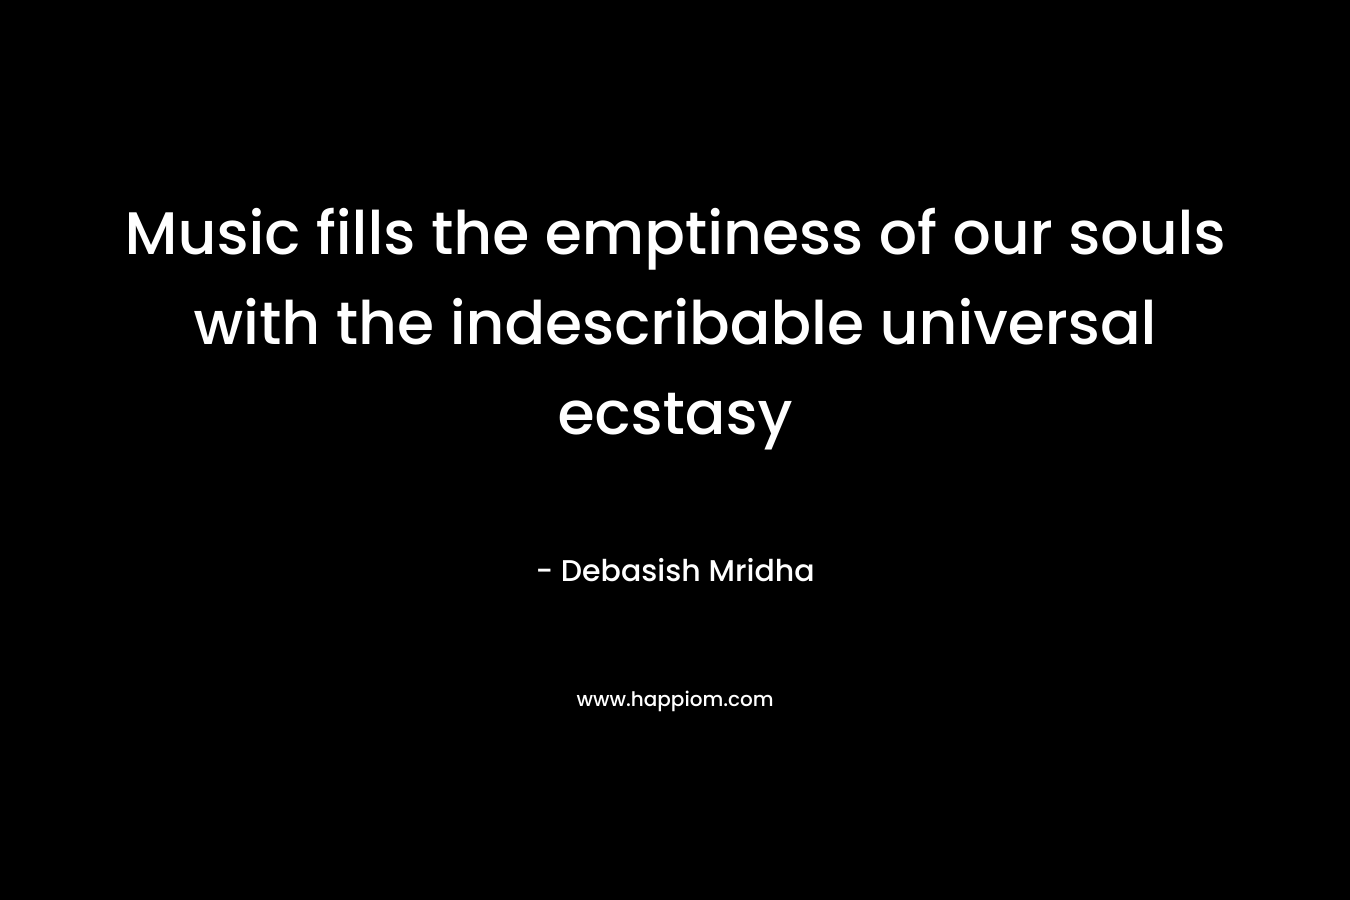 Music fills the emptiness of our souls with the indescribable universal ecstasy